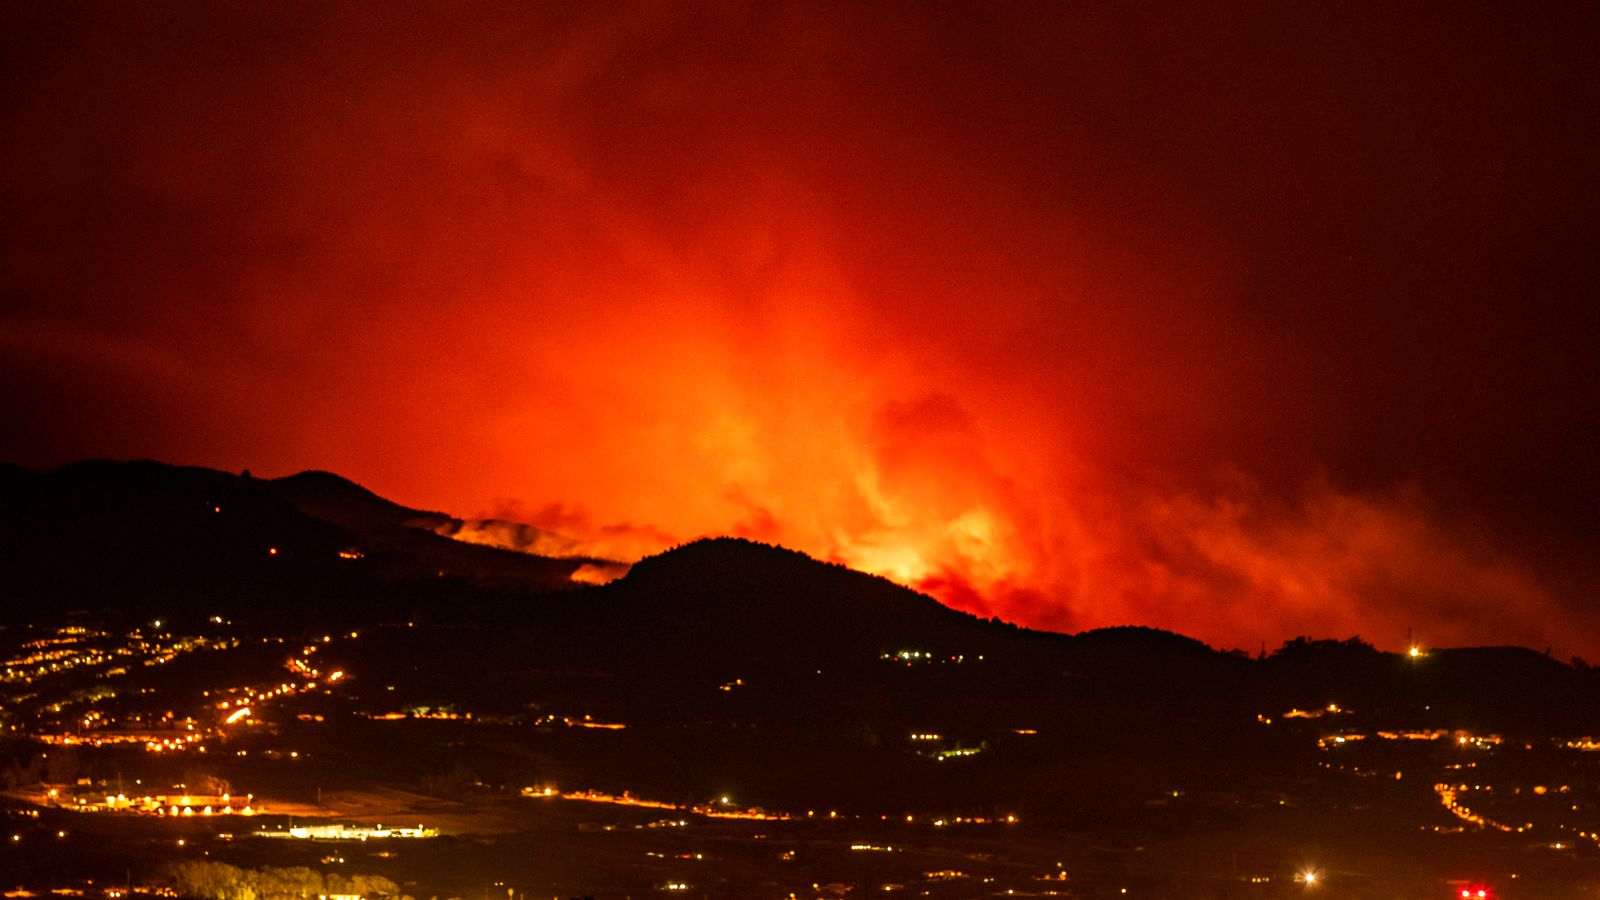 Tenerife wildfires: Tourists watch in horror as blaze spreads across island forcing thousands to evacuate